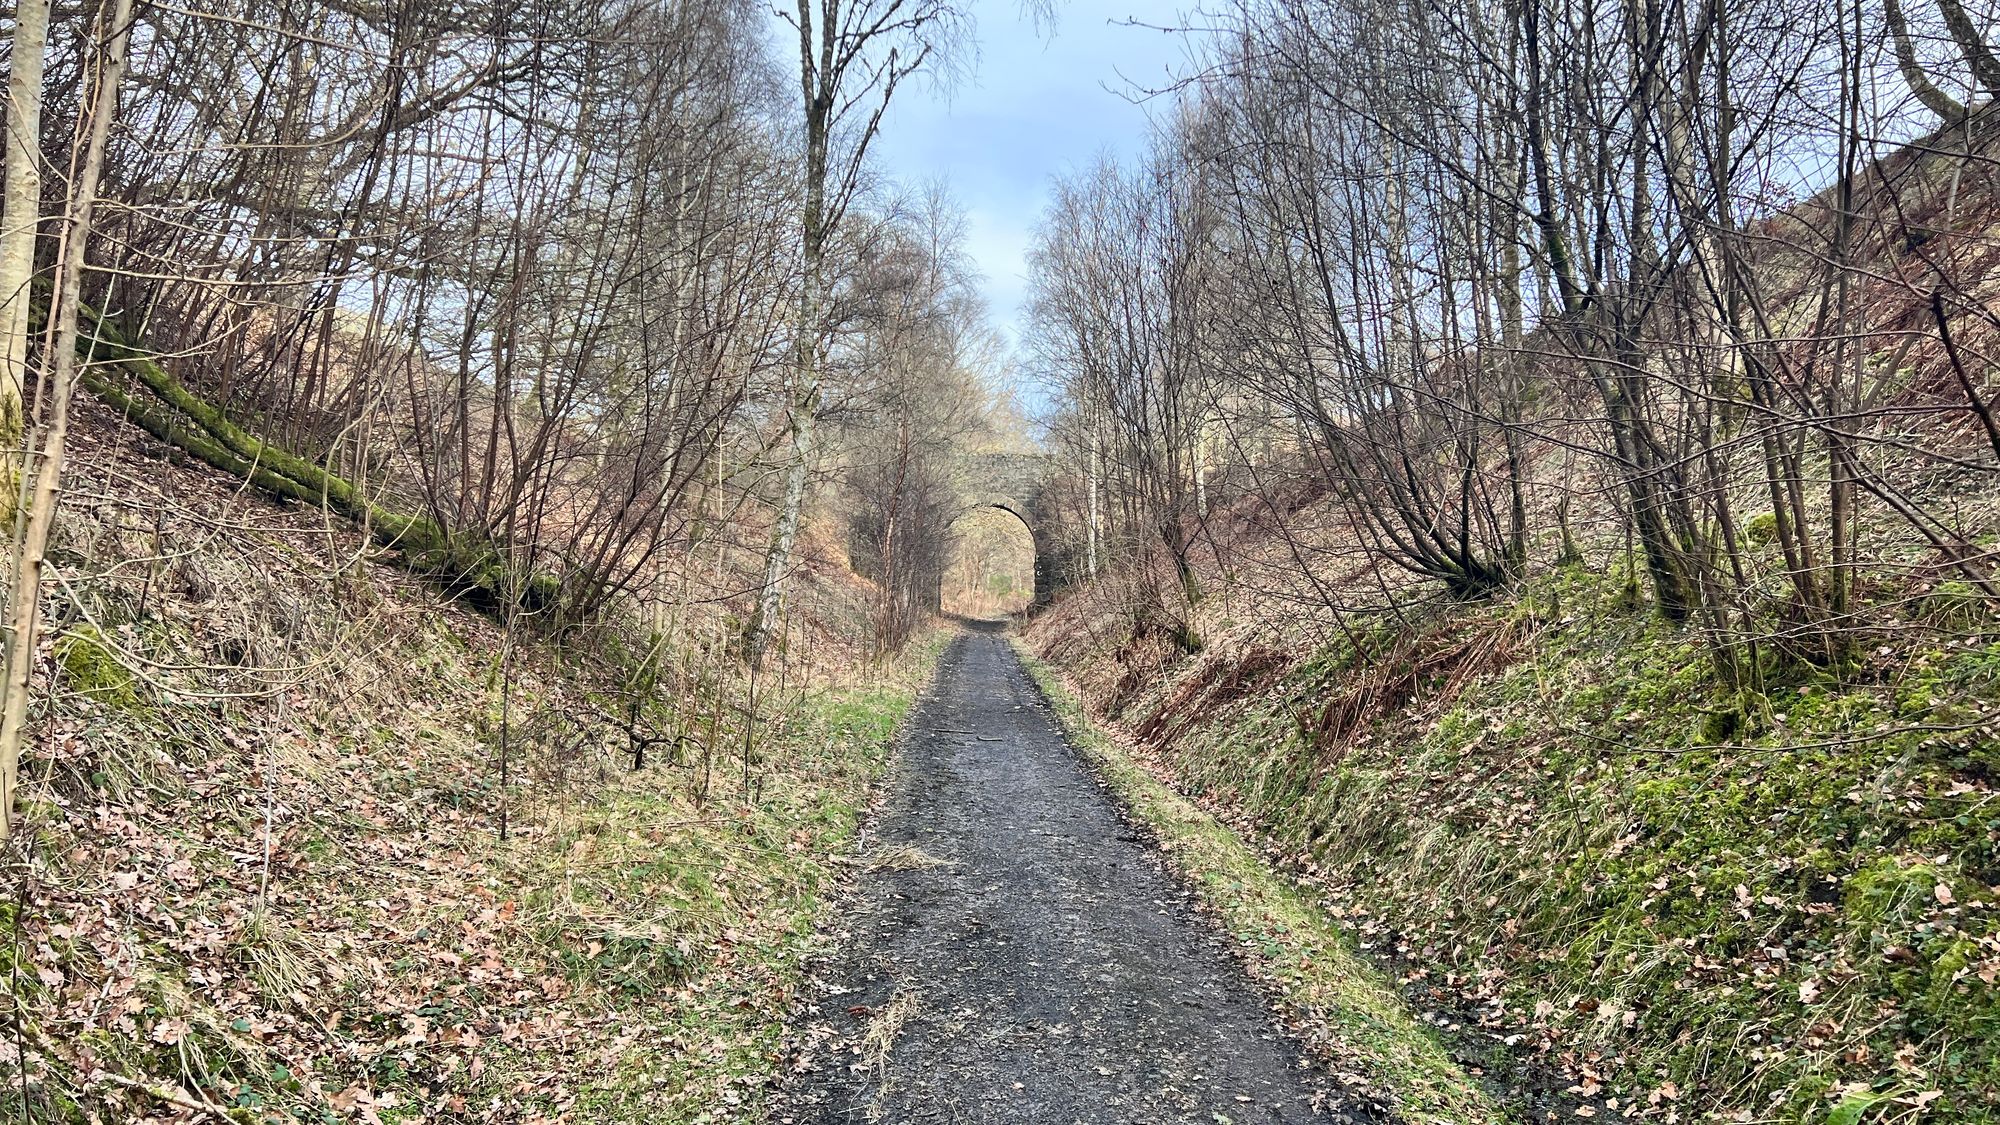 A section of the Rob Roy Way between Aberfeldy and Grandtully